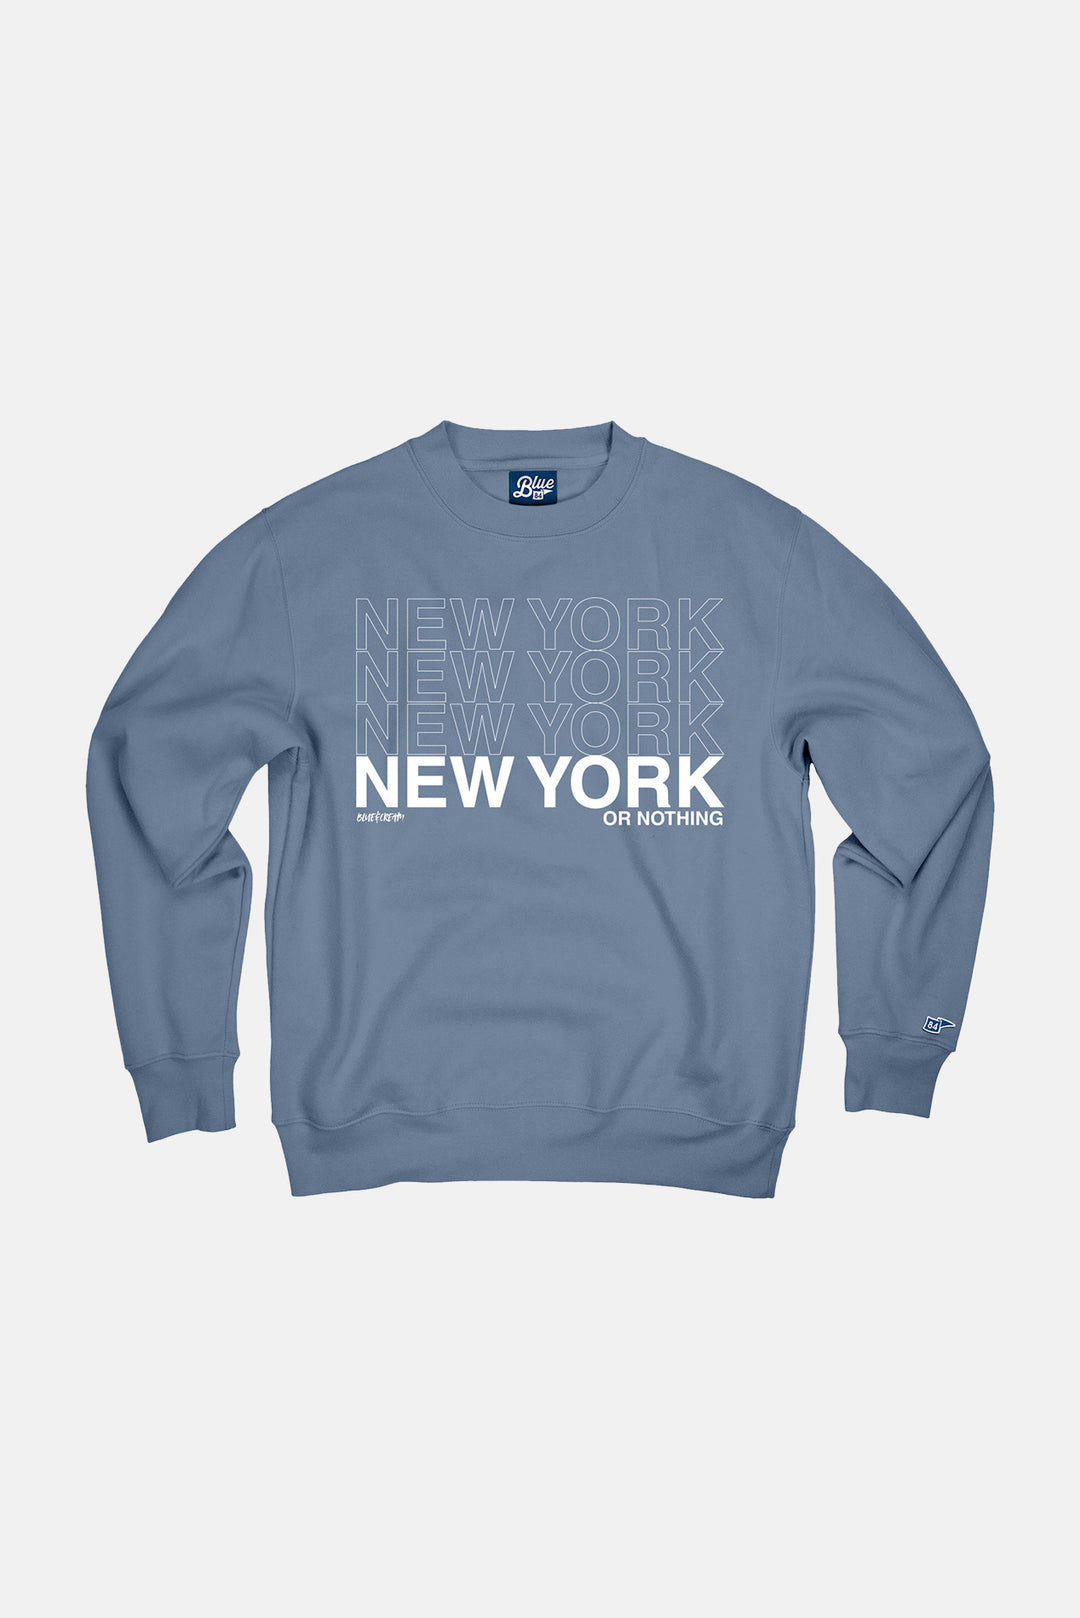 New York or Nothing Crewneck Baltic